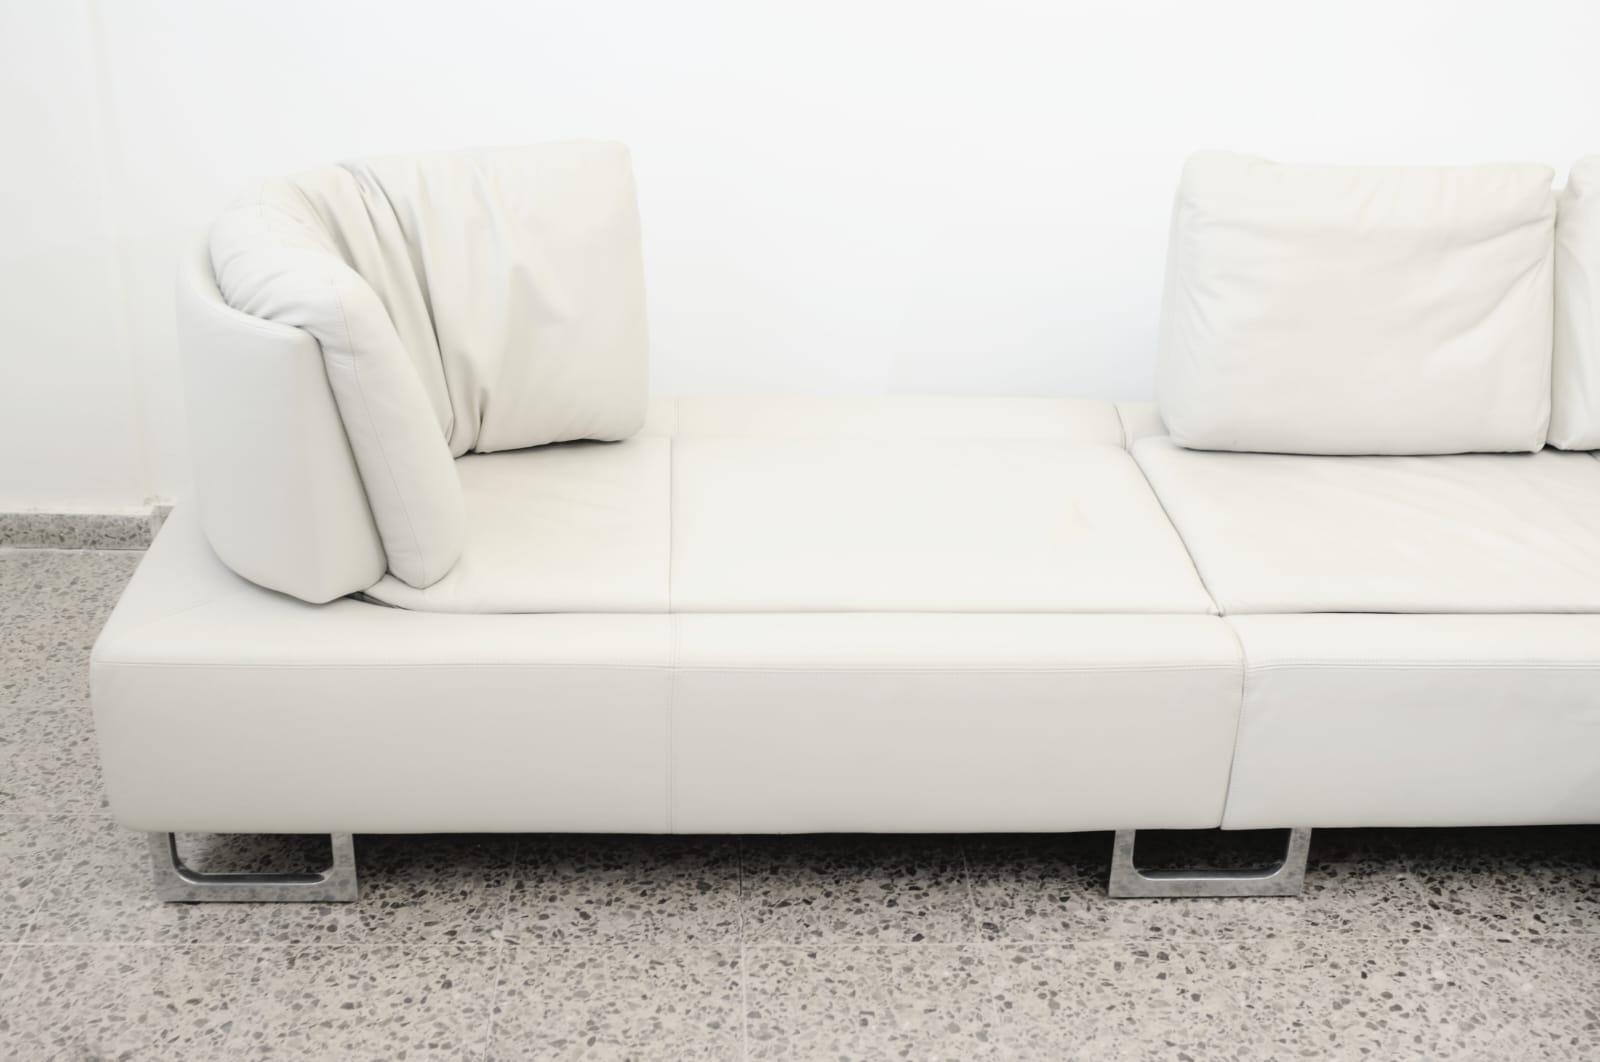 de Sede DS-165 Motion Leather Chaise Lounge Sofas In Good Condition For Sale In PEGO, ES